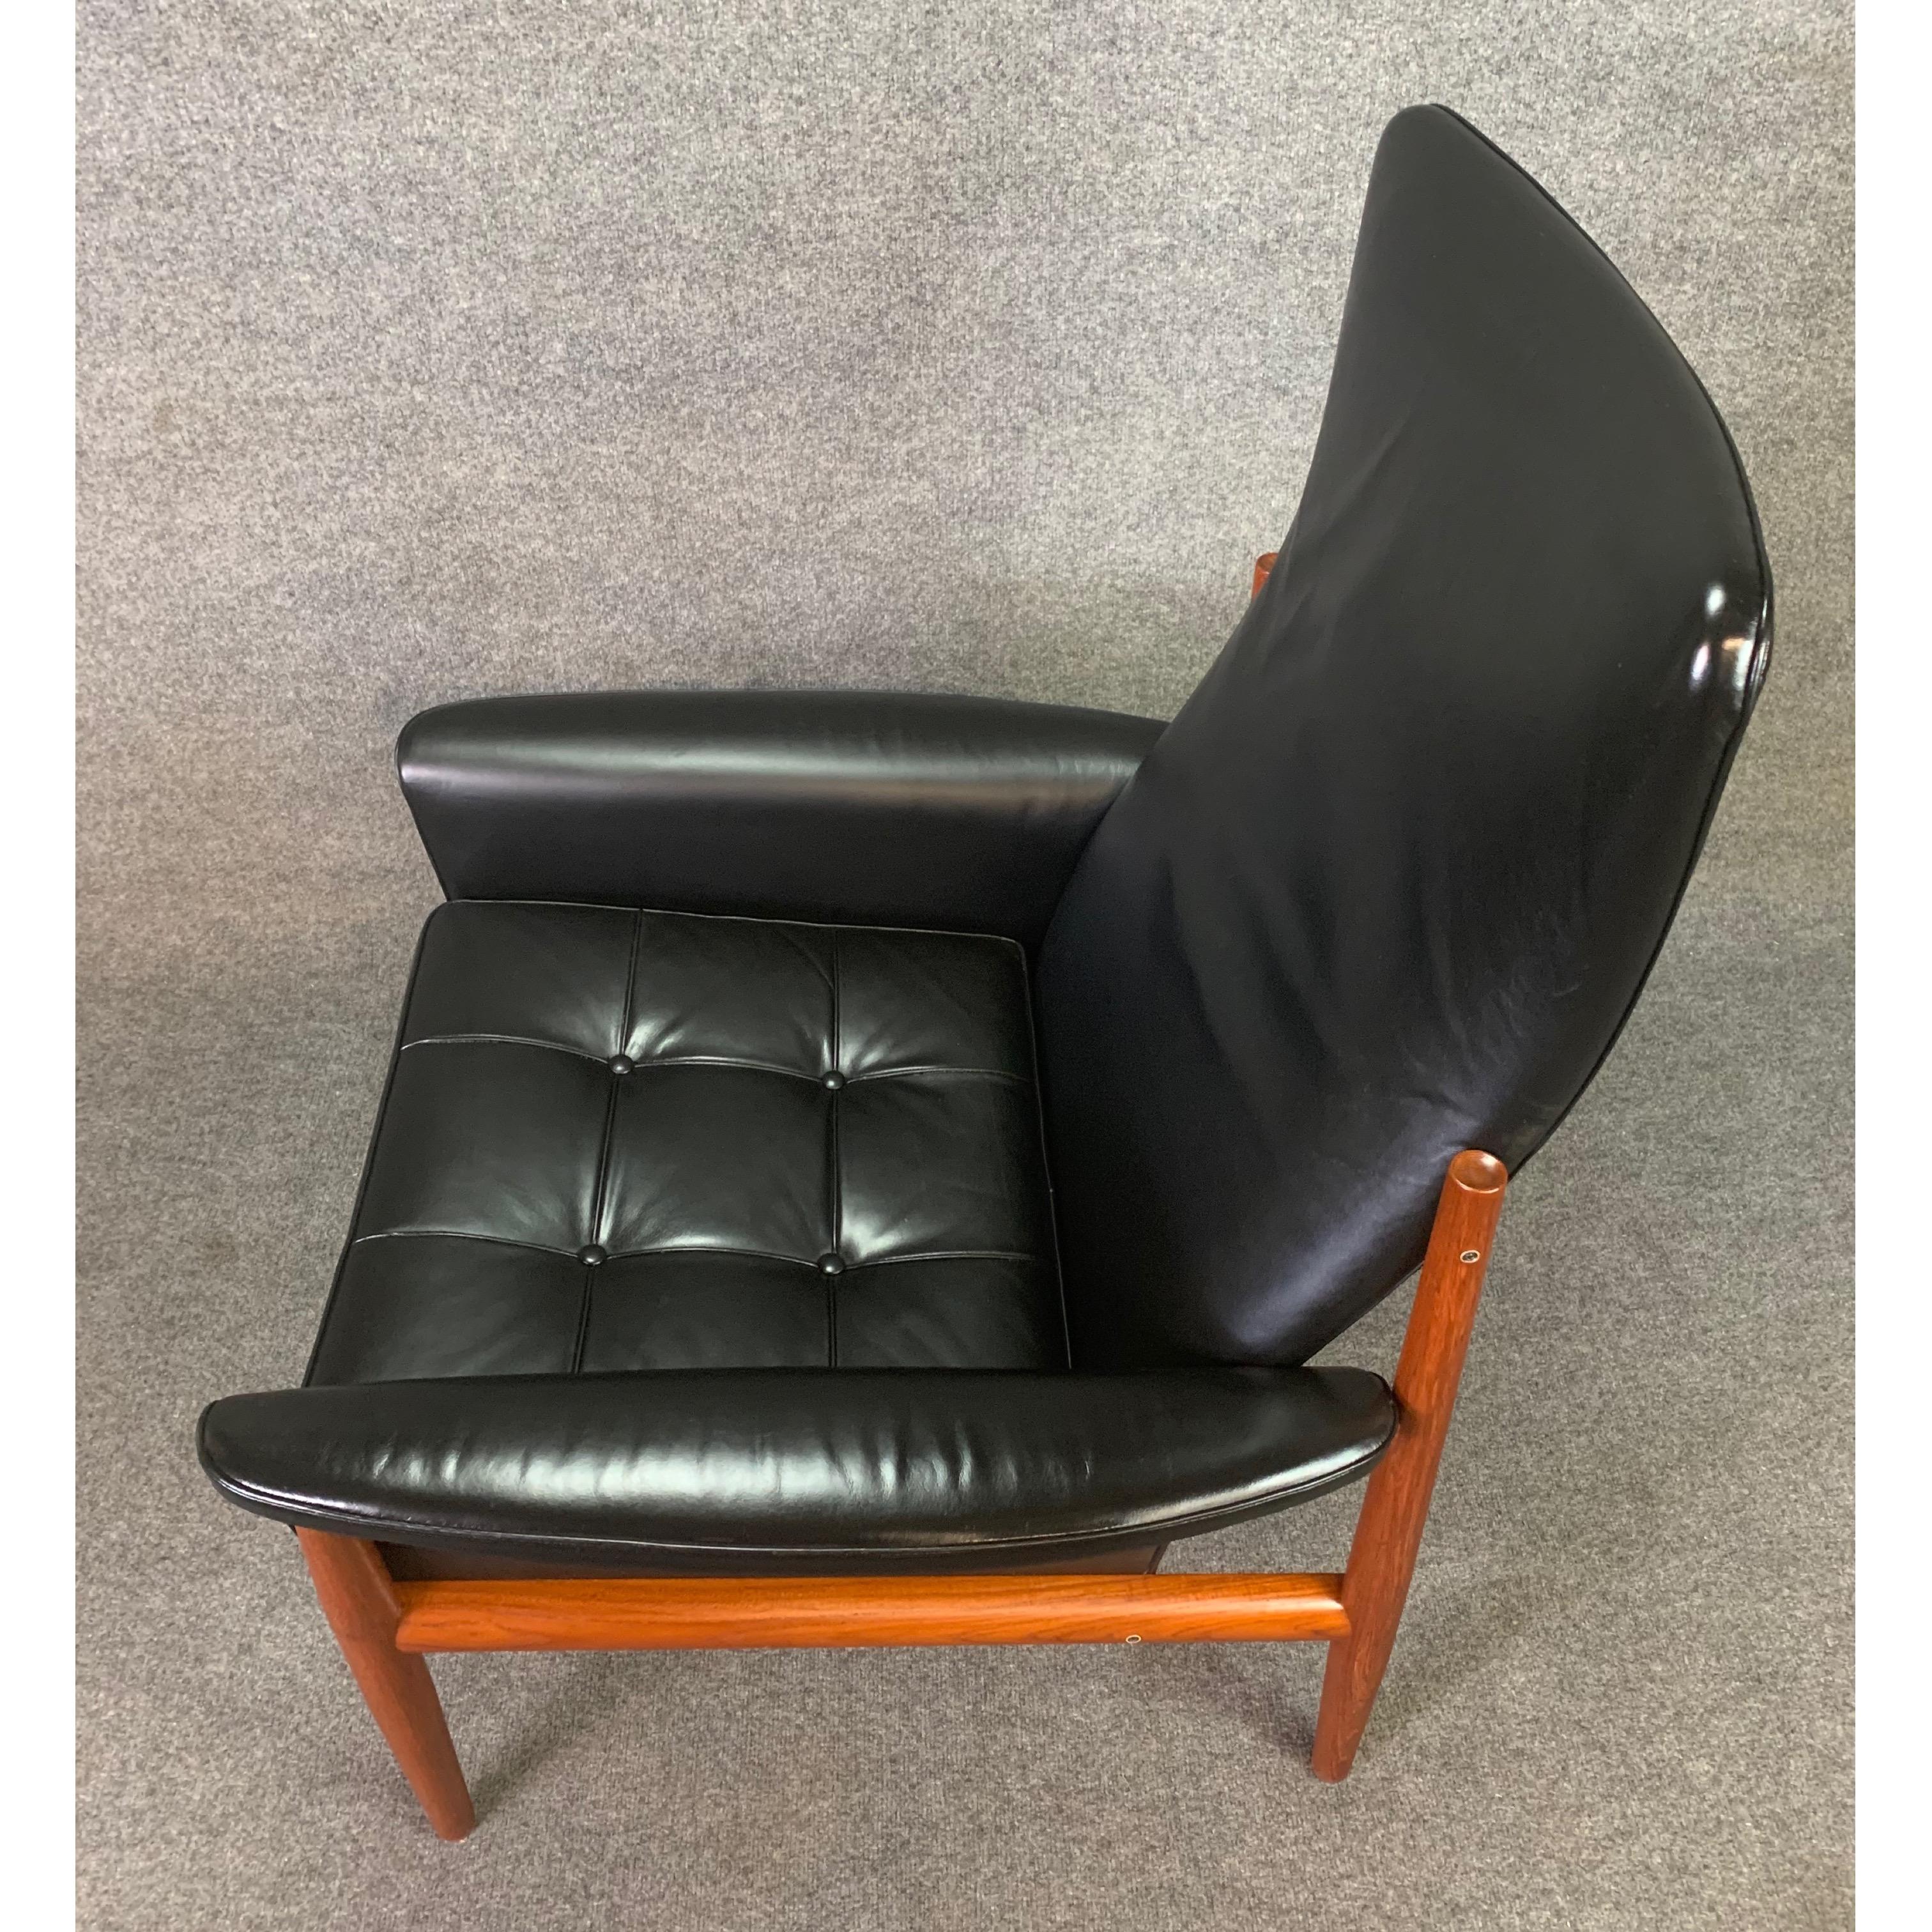 Here is an exclusive 1950's Scandinavian modern high back easy chair, model 